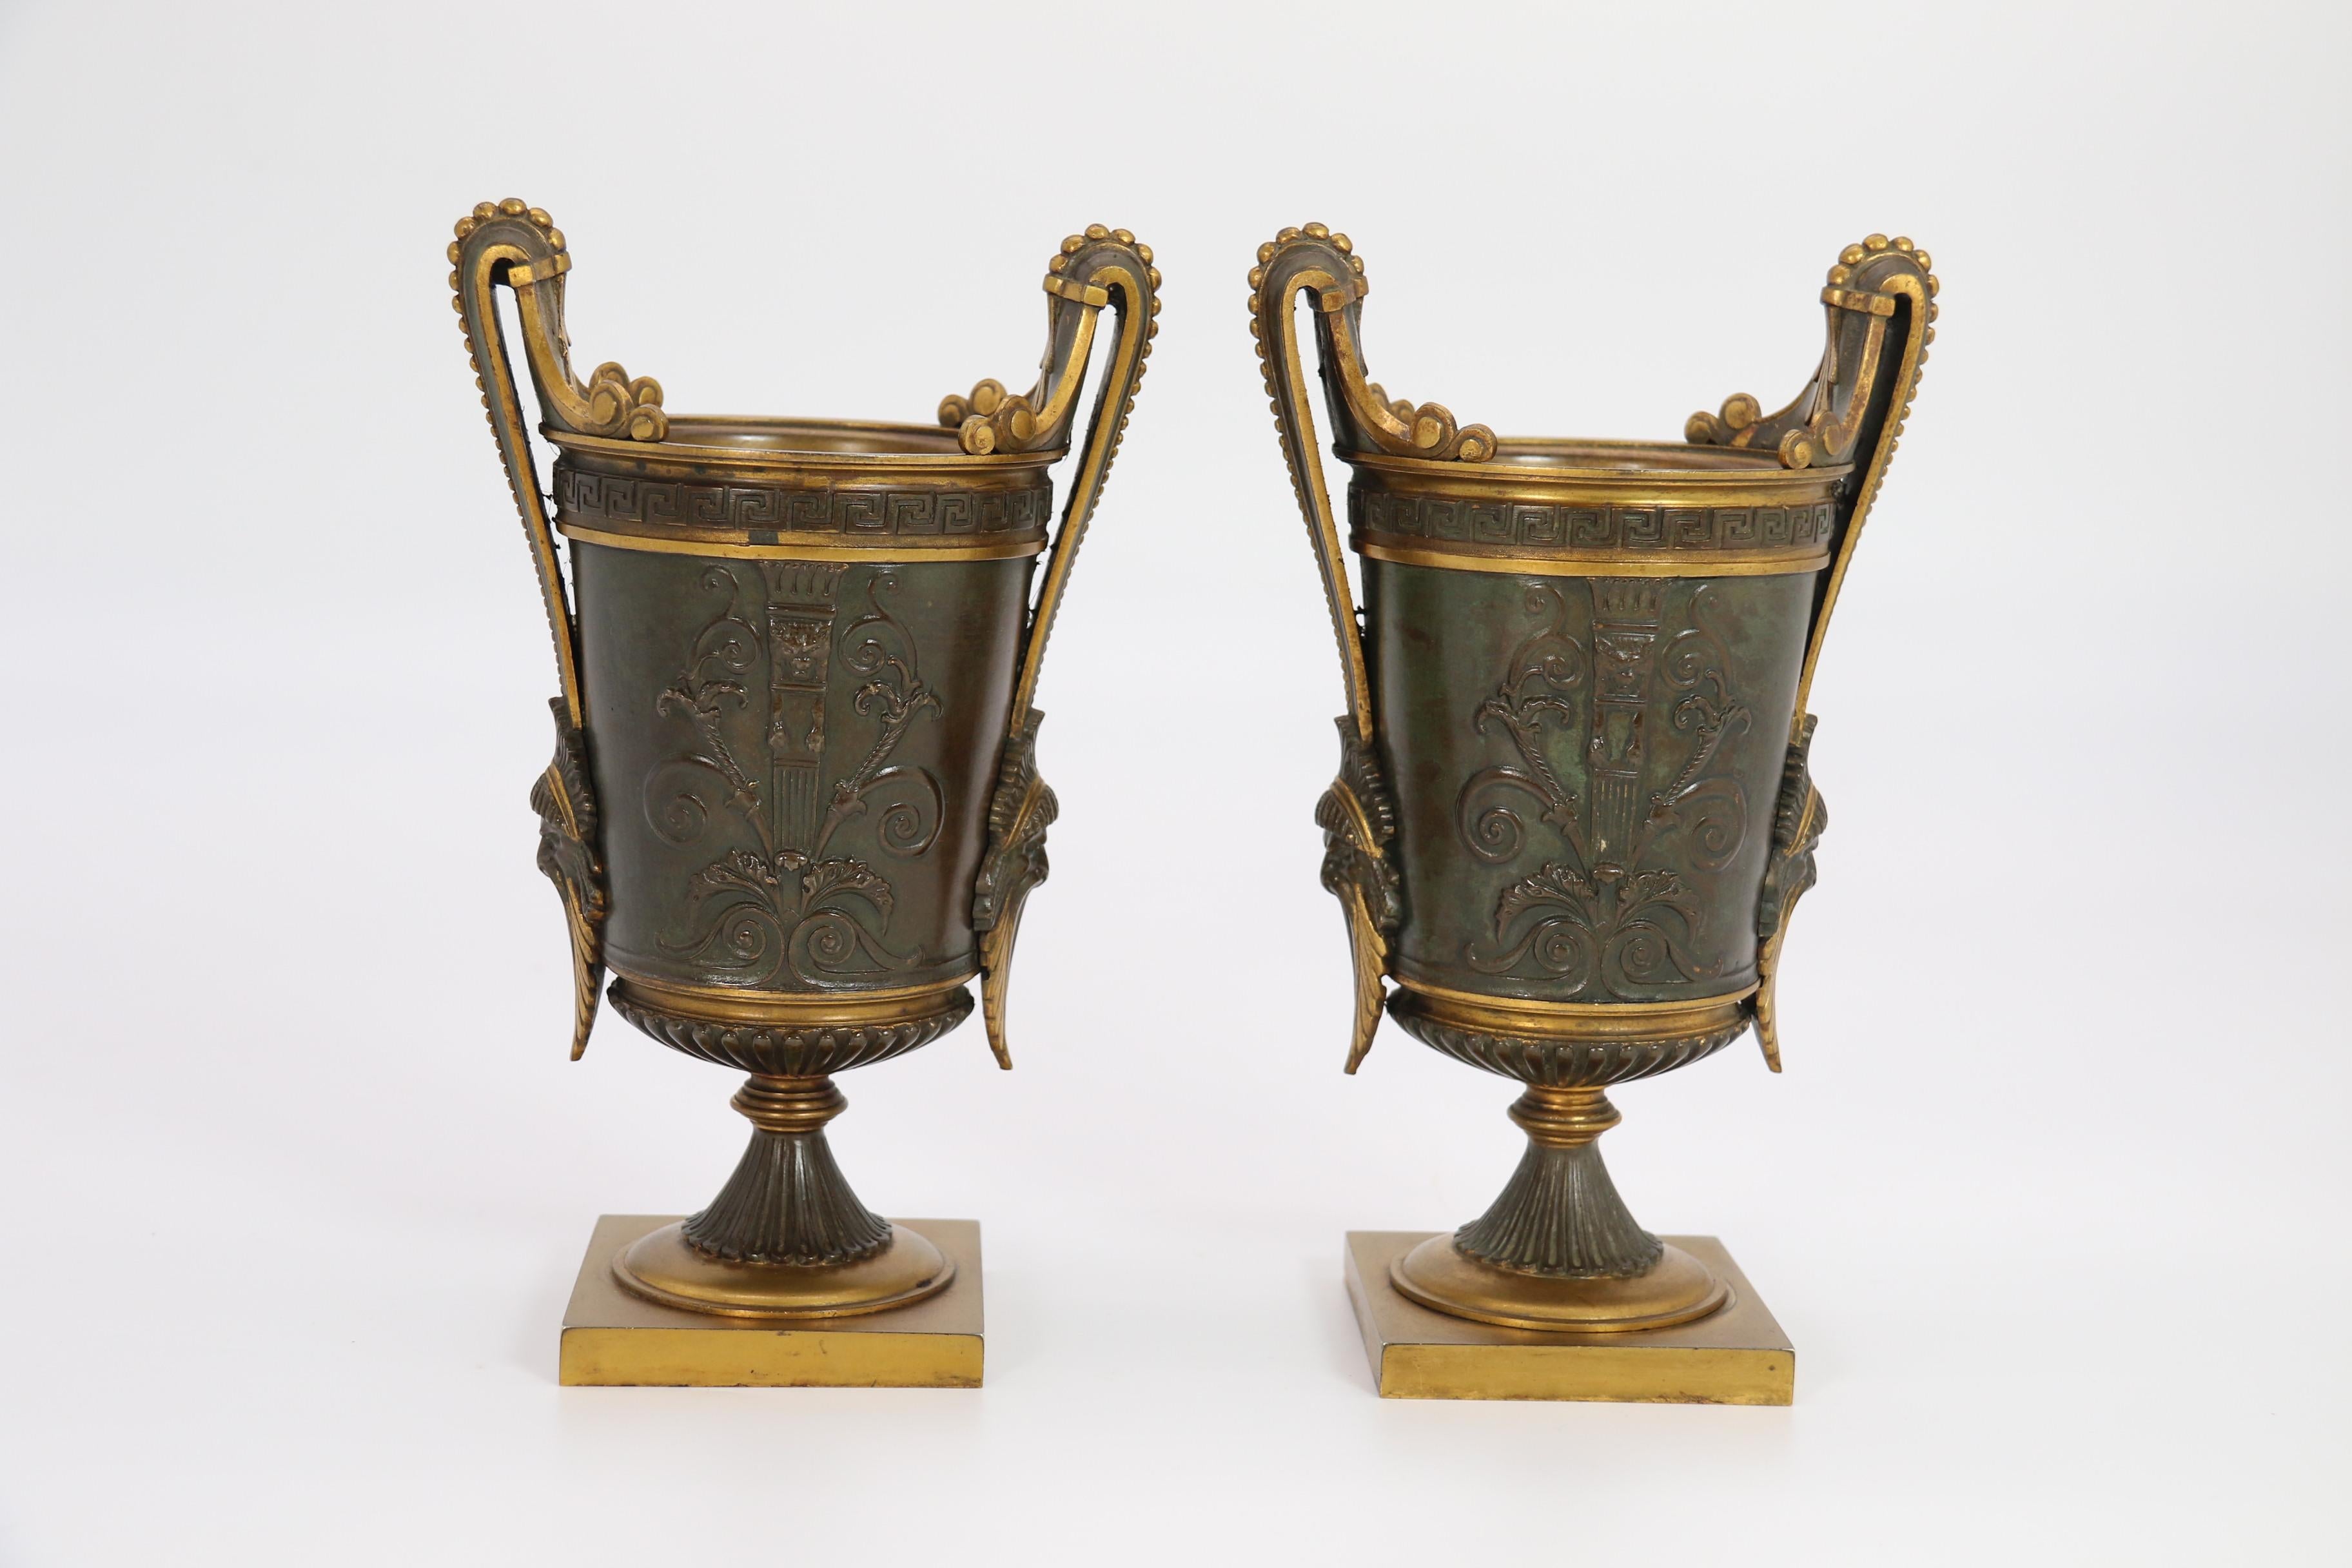 French Empire period bronze and ormolu Grecian style pair of classical urns, circa 1830 For Sale